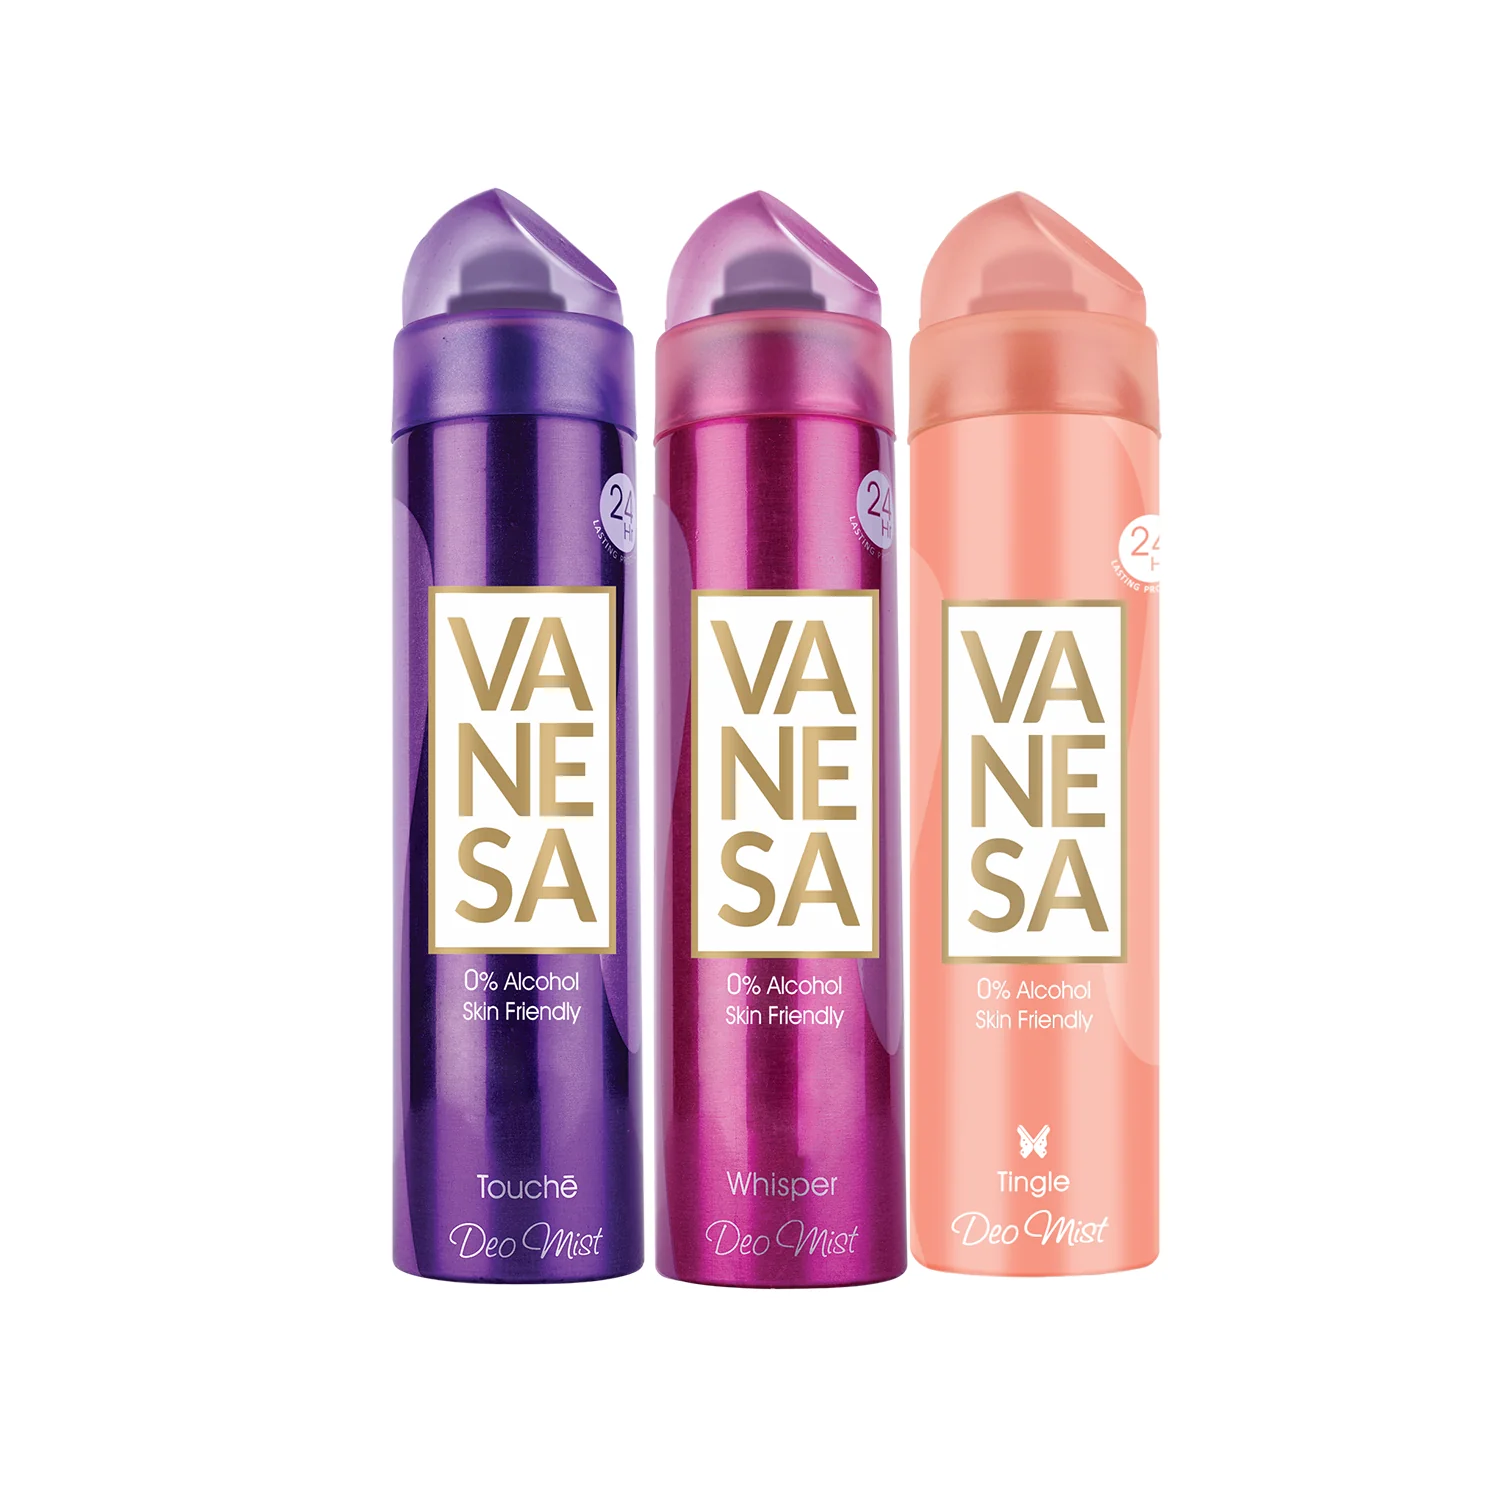 Vanesa  Deo Mist 24 hours Lasting Protection for Women